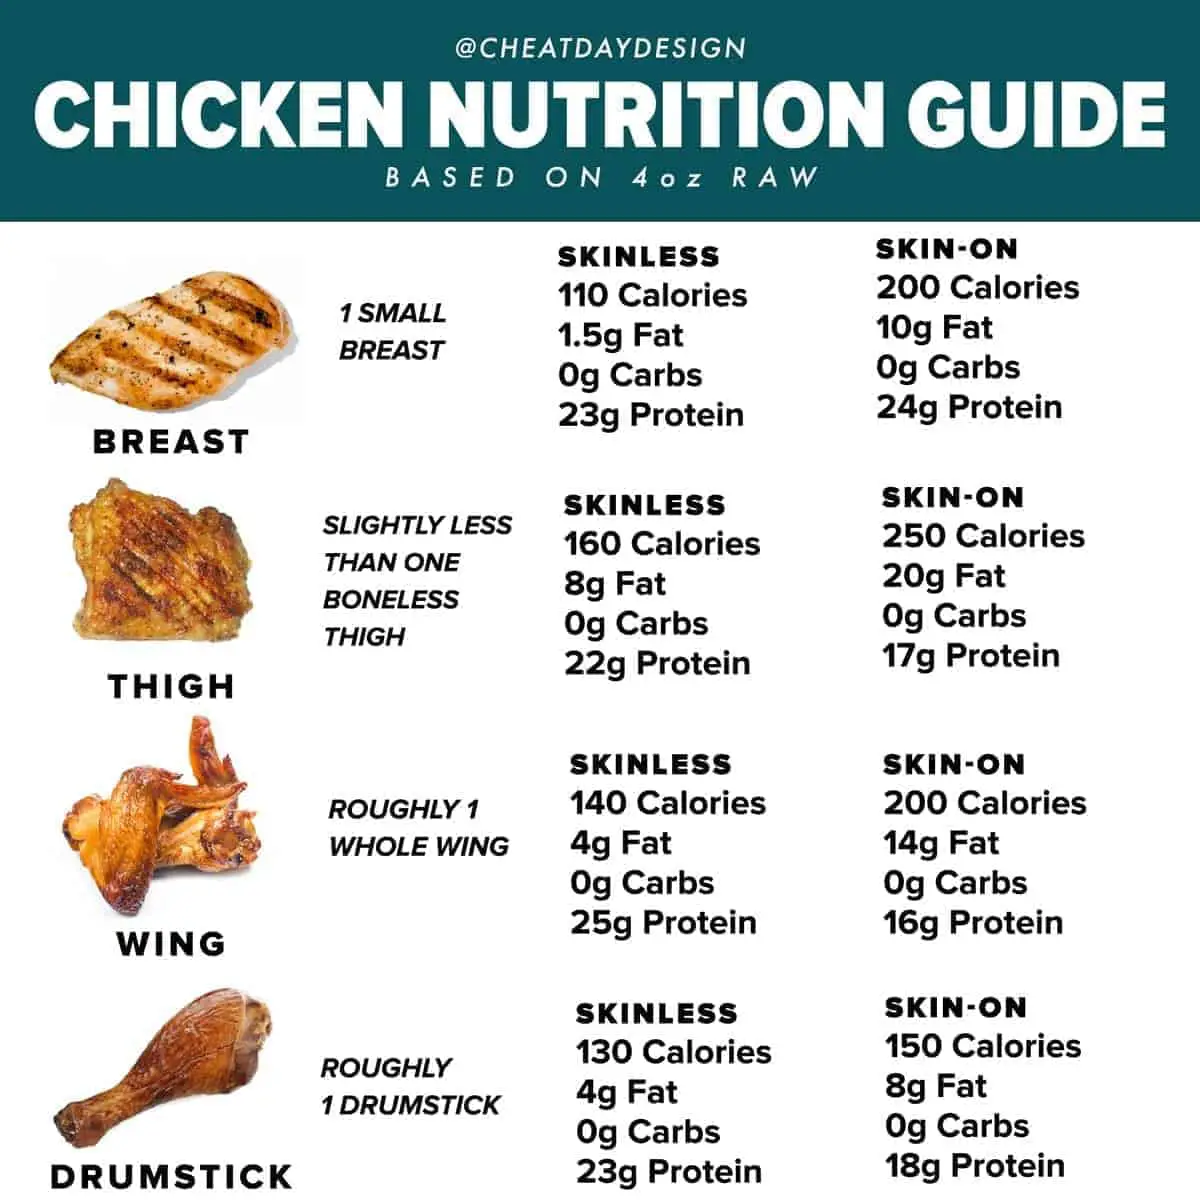 How Many Calories In Chicken Breast